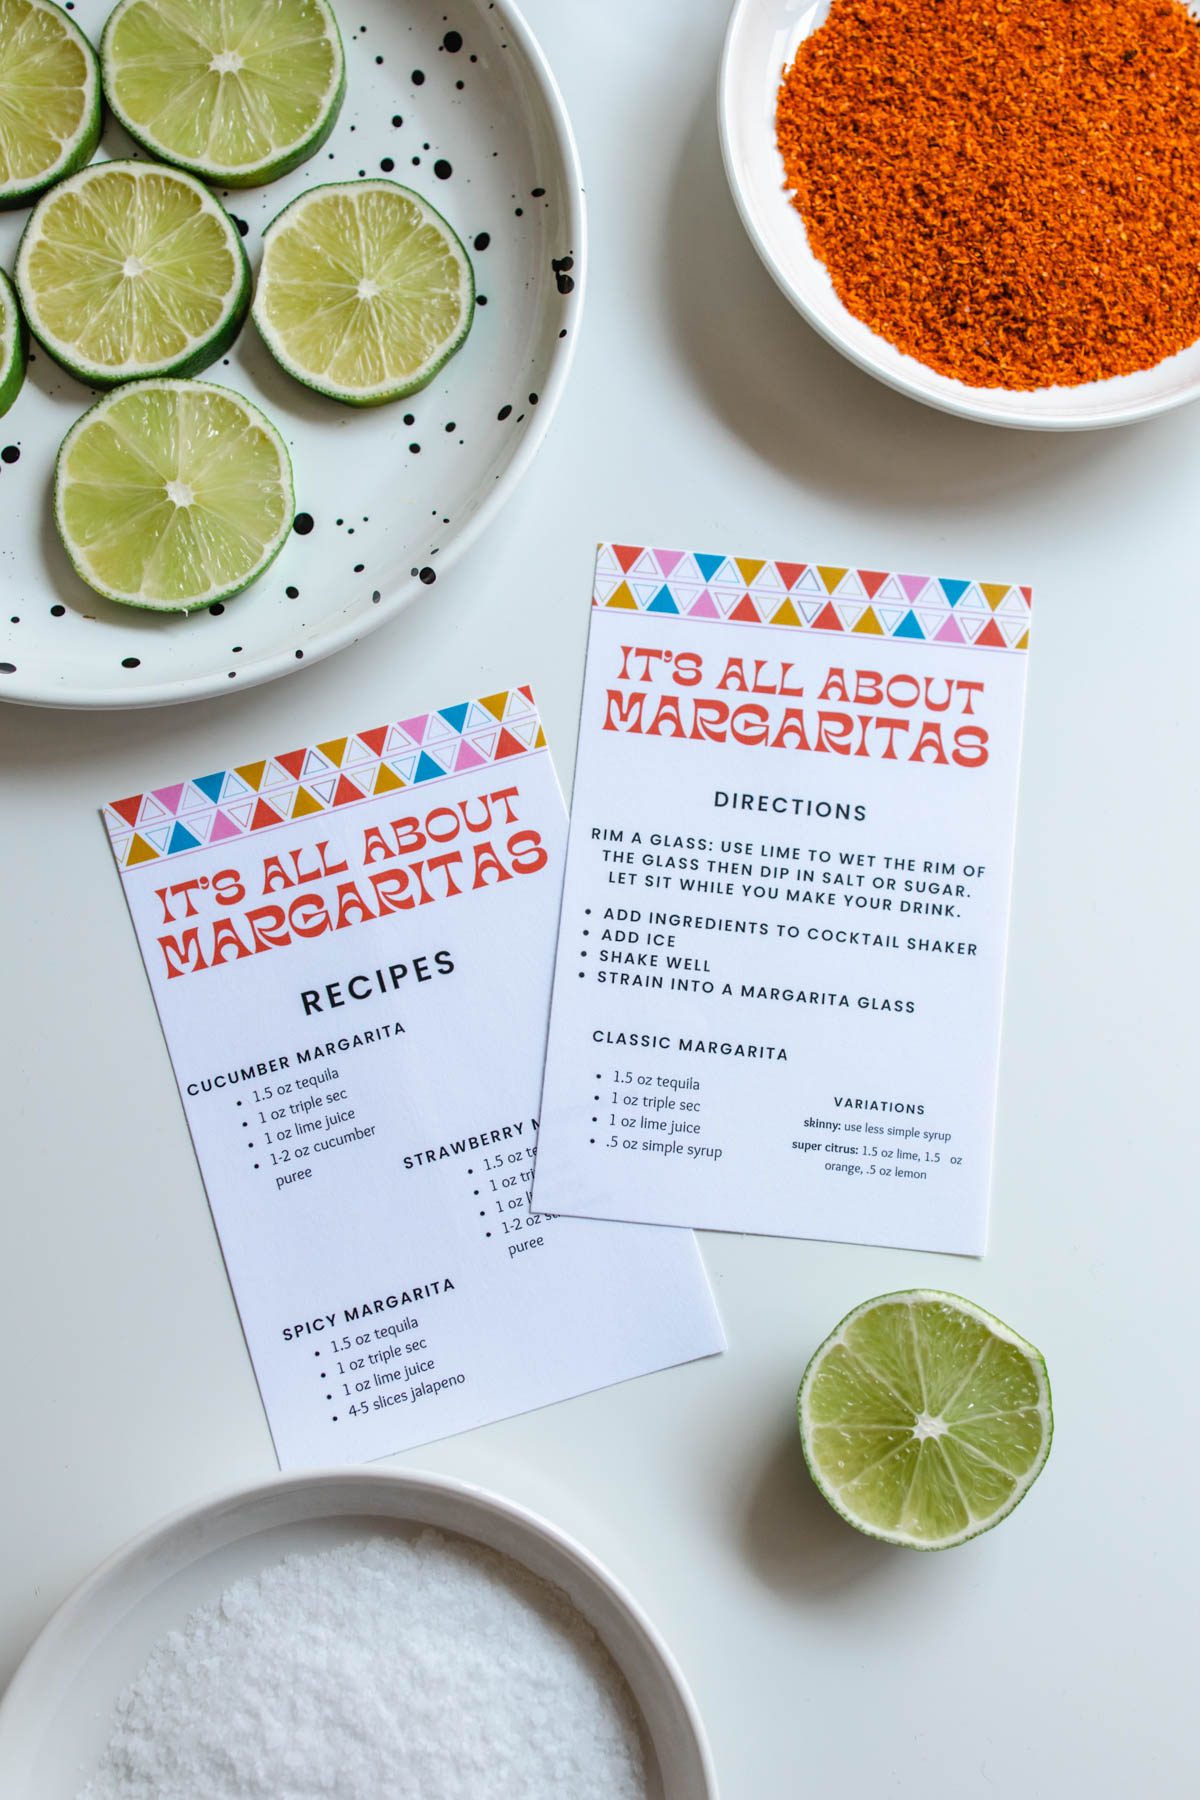 Two plates of sliced limes and Tajin with printables of recipes and directions on how to make margaritas below them.